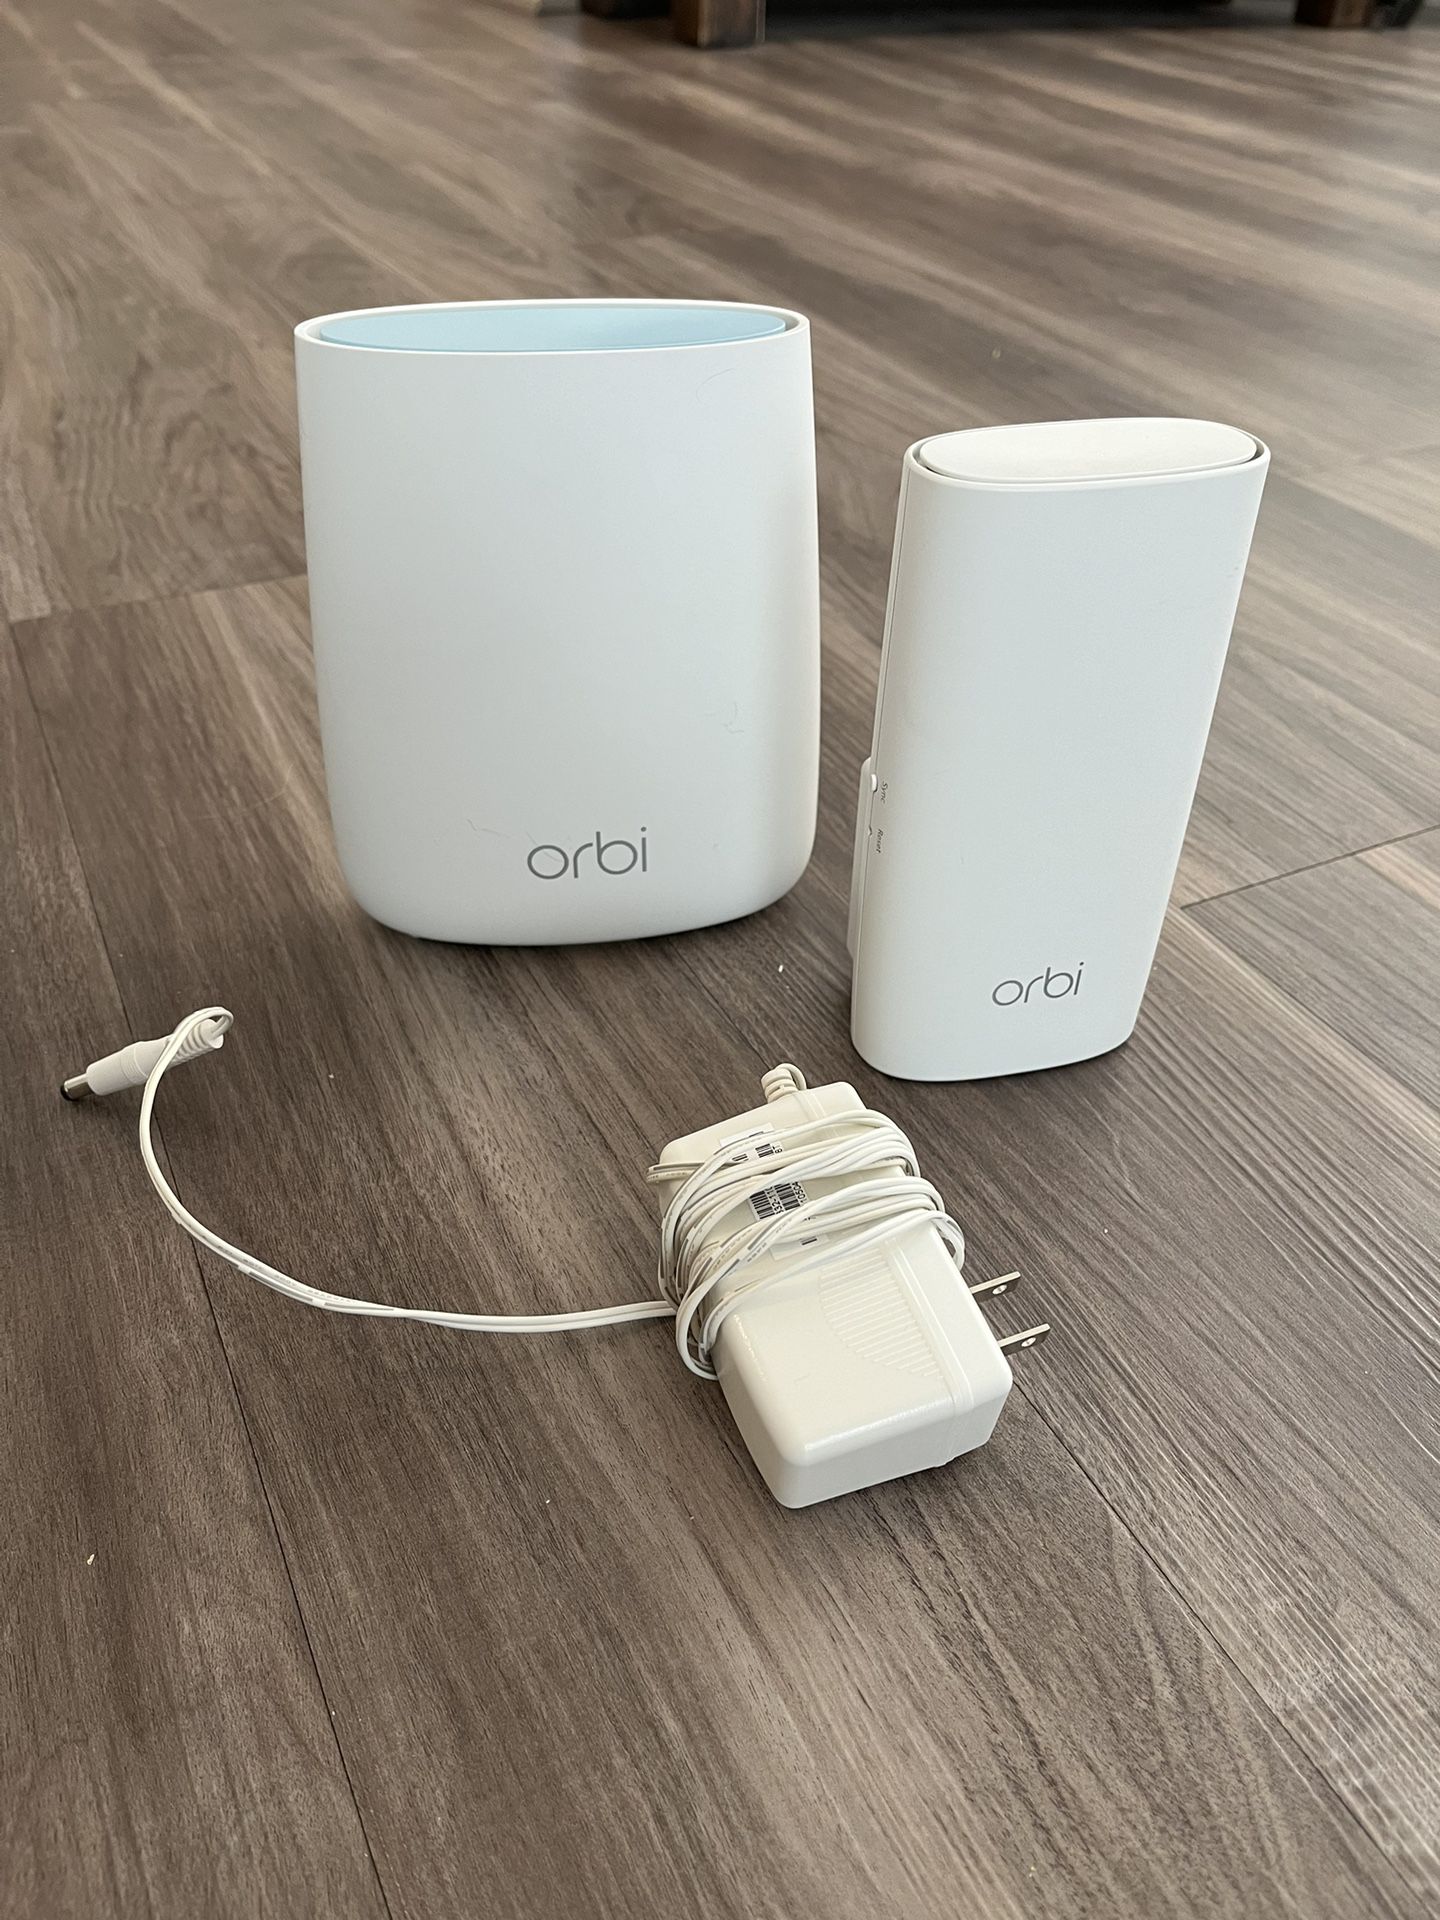 NETGEAR Orbi Compact Wall-Plug Whole Home Mesh WiFi System. Router and wall plug satellite extender.